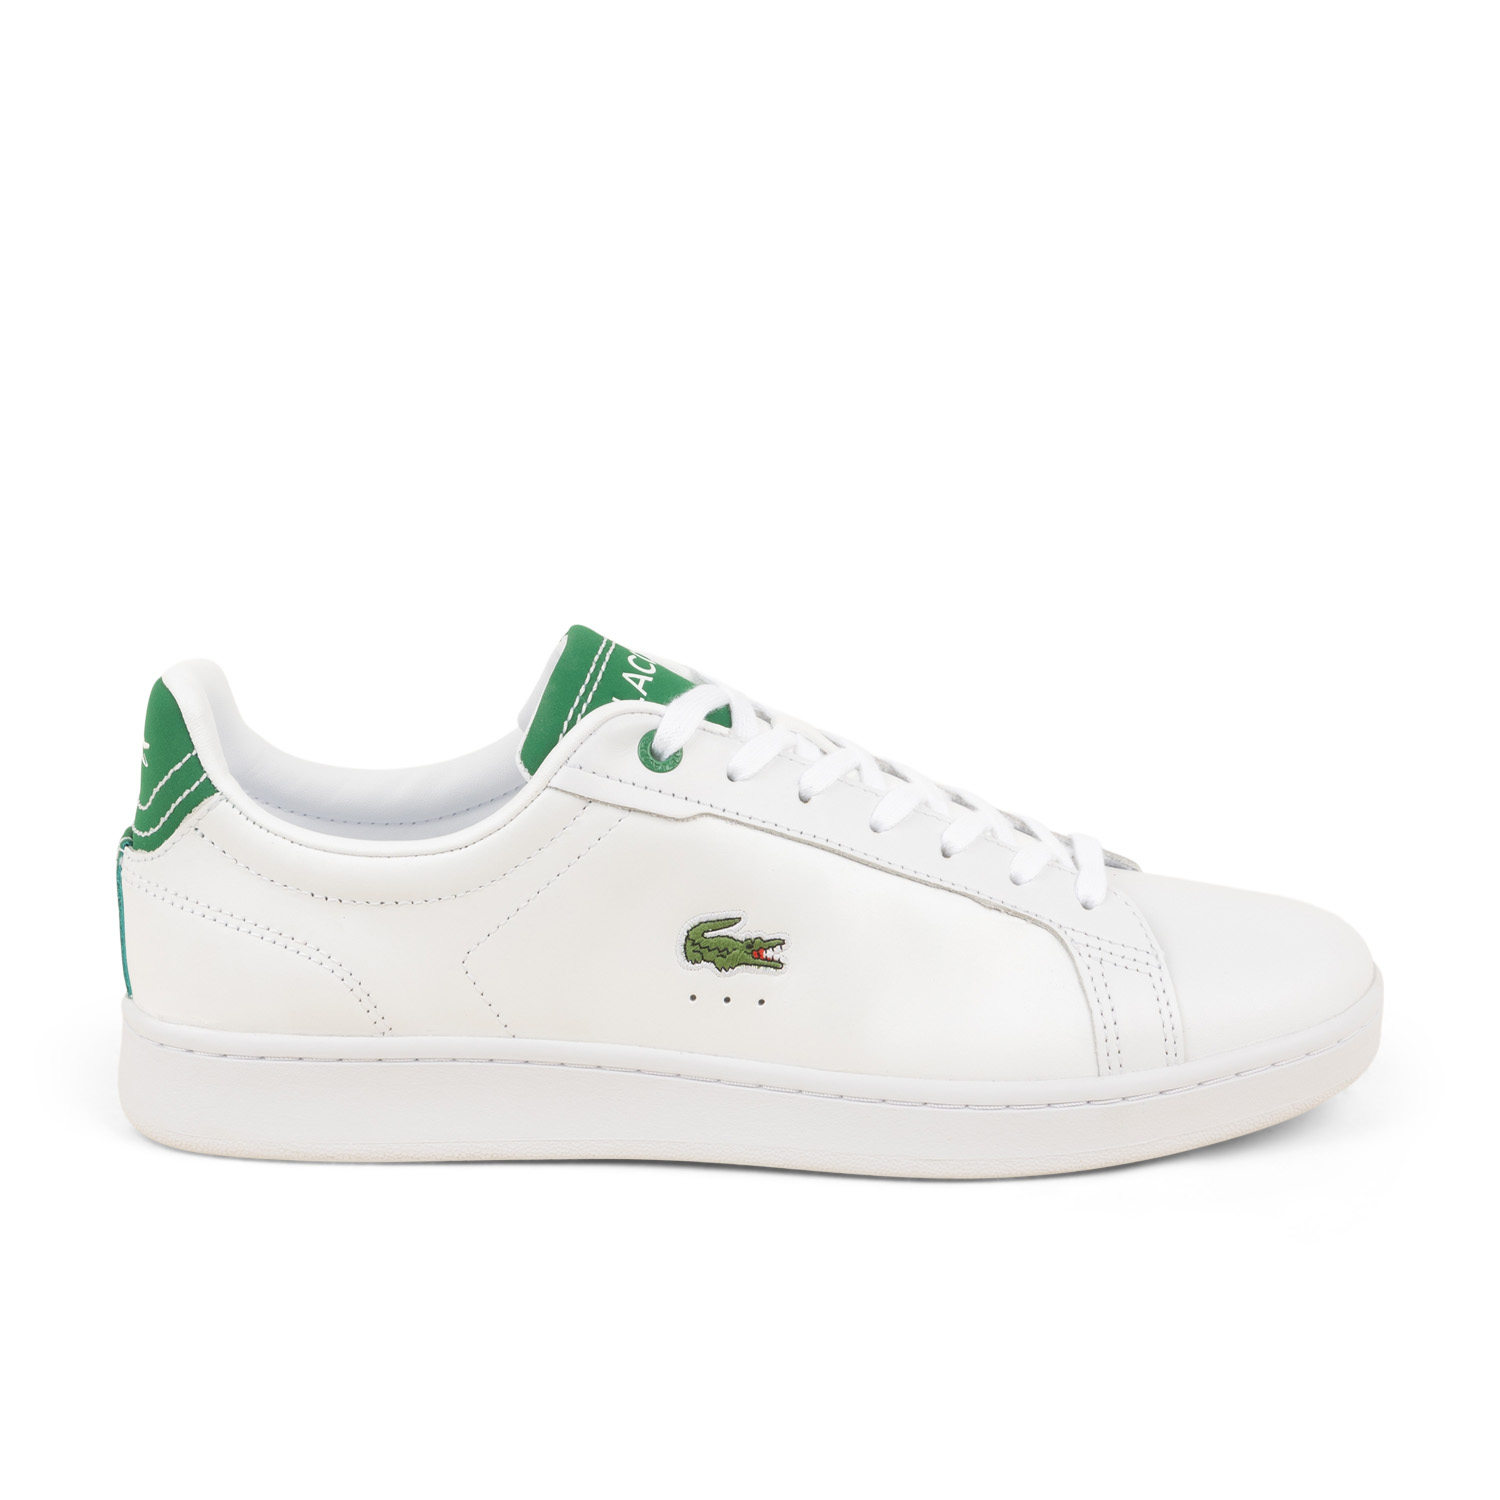 01 - CARNABY - LACOSTE - Baskets - Cuir